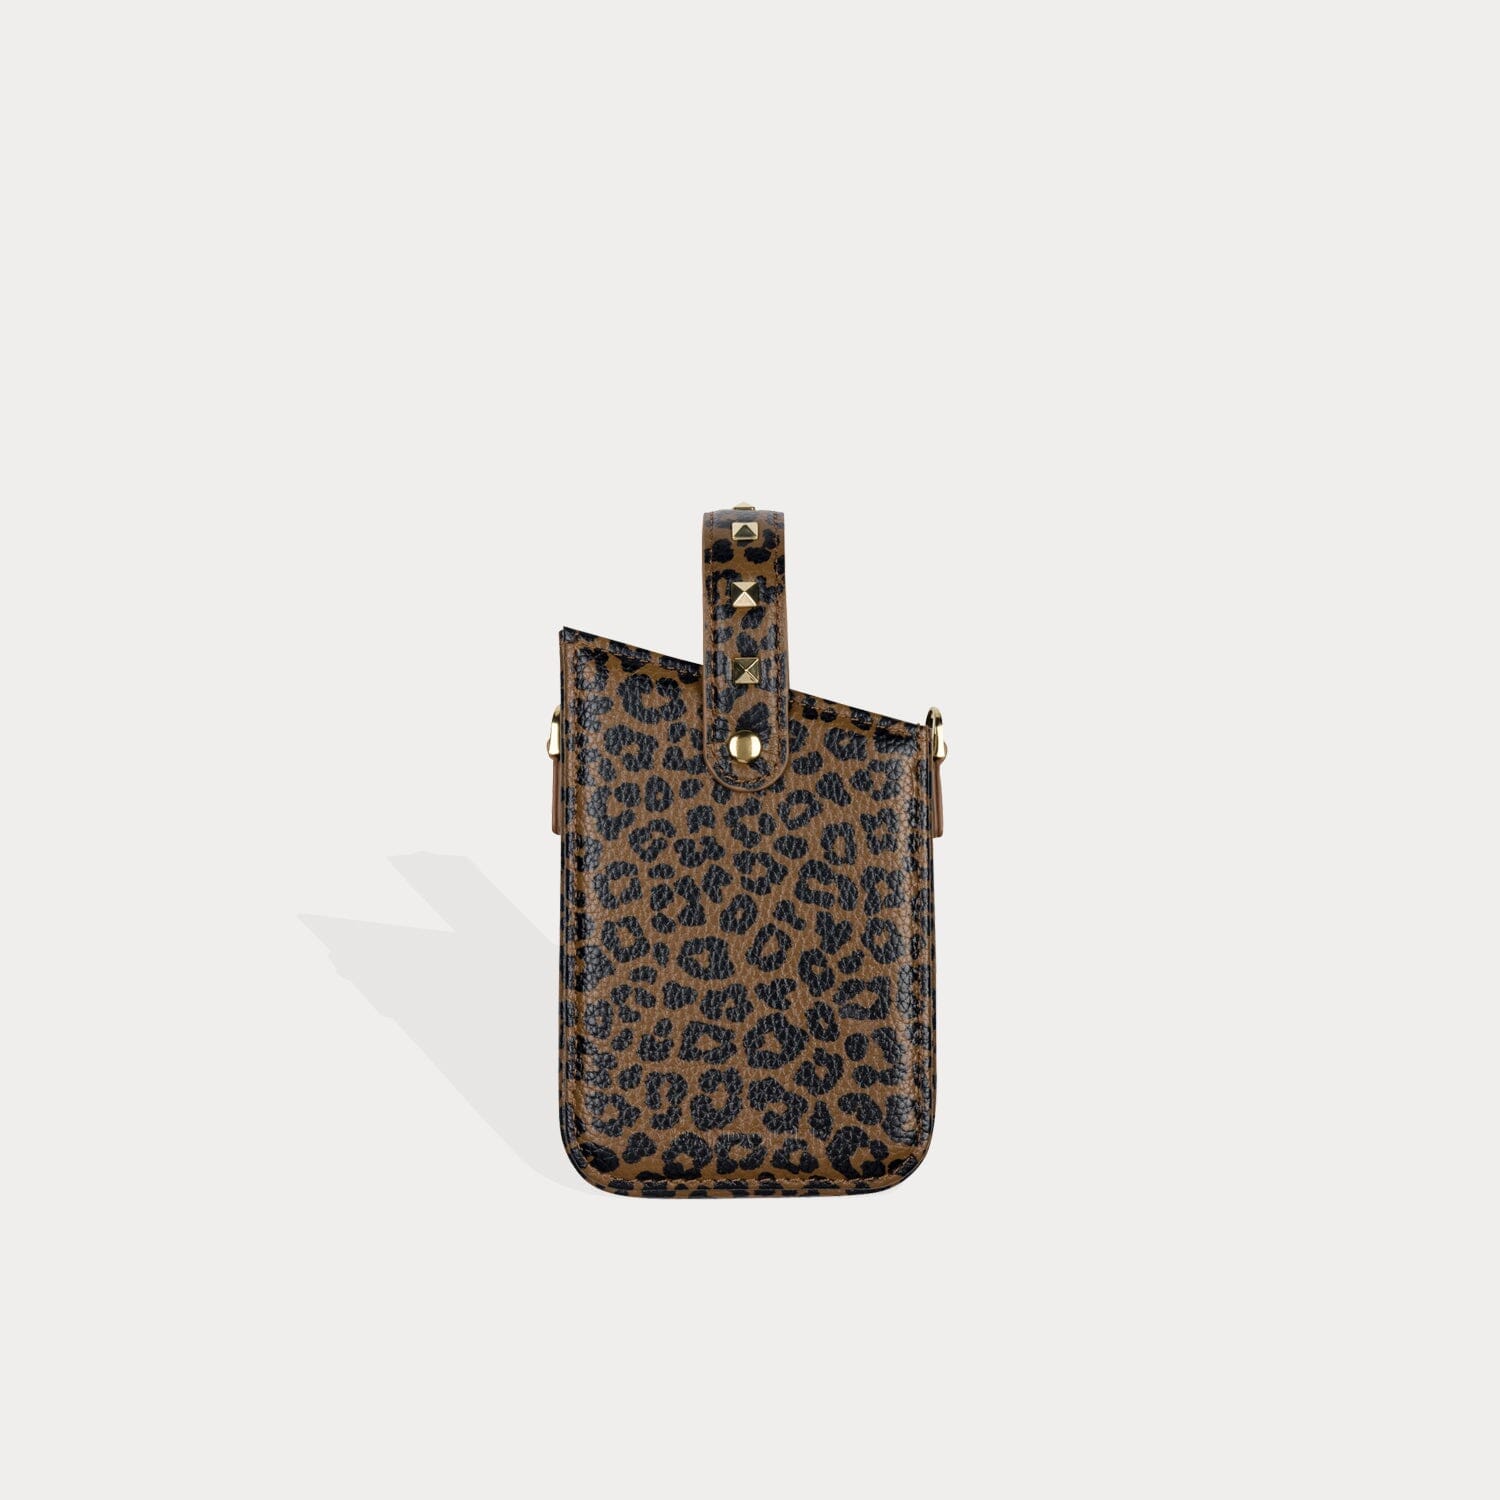 Emma Phone Pouch and Holster - Dark Leopard/Gold Accessories Bandolier 